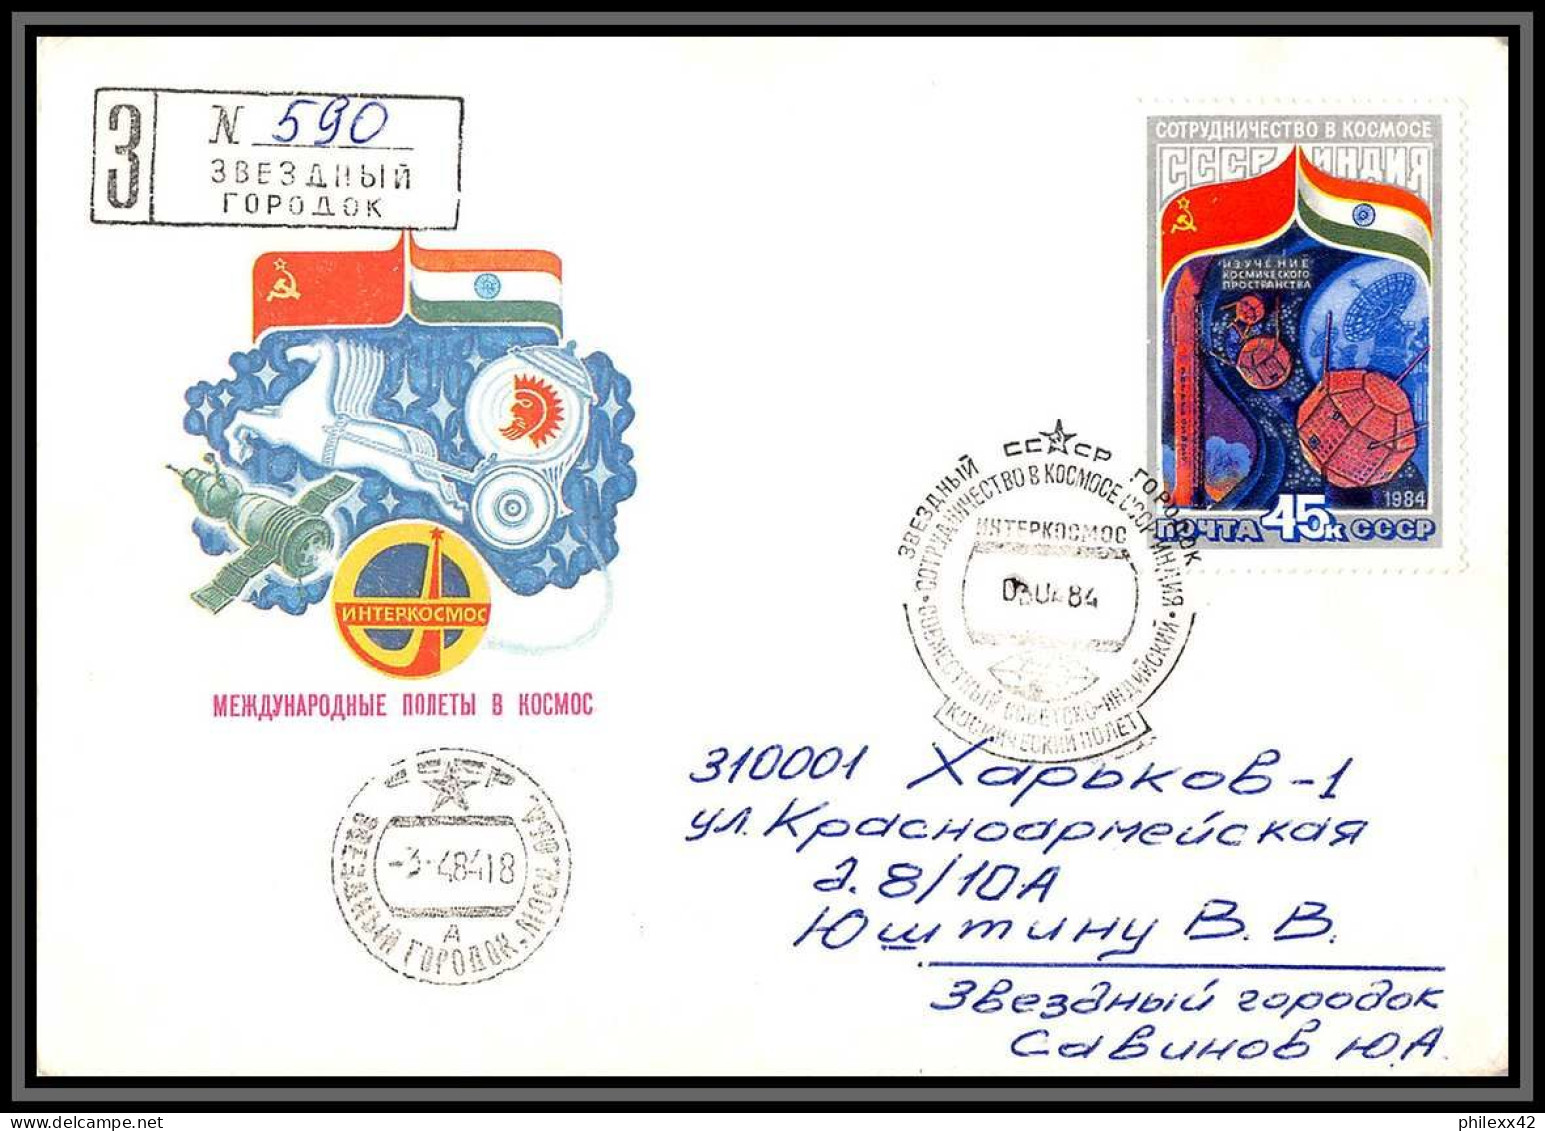 3598 Espace Space Lot 3 Lettres Cover Russia Urss USSR 3/4/1984 Intercosmos 5088/5090 Recommandé Registered - United States